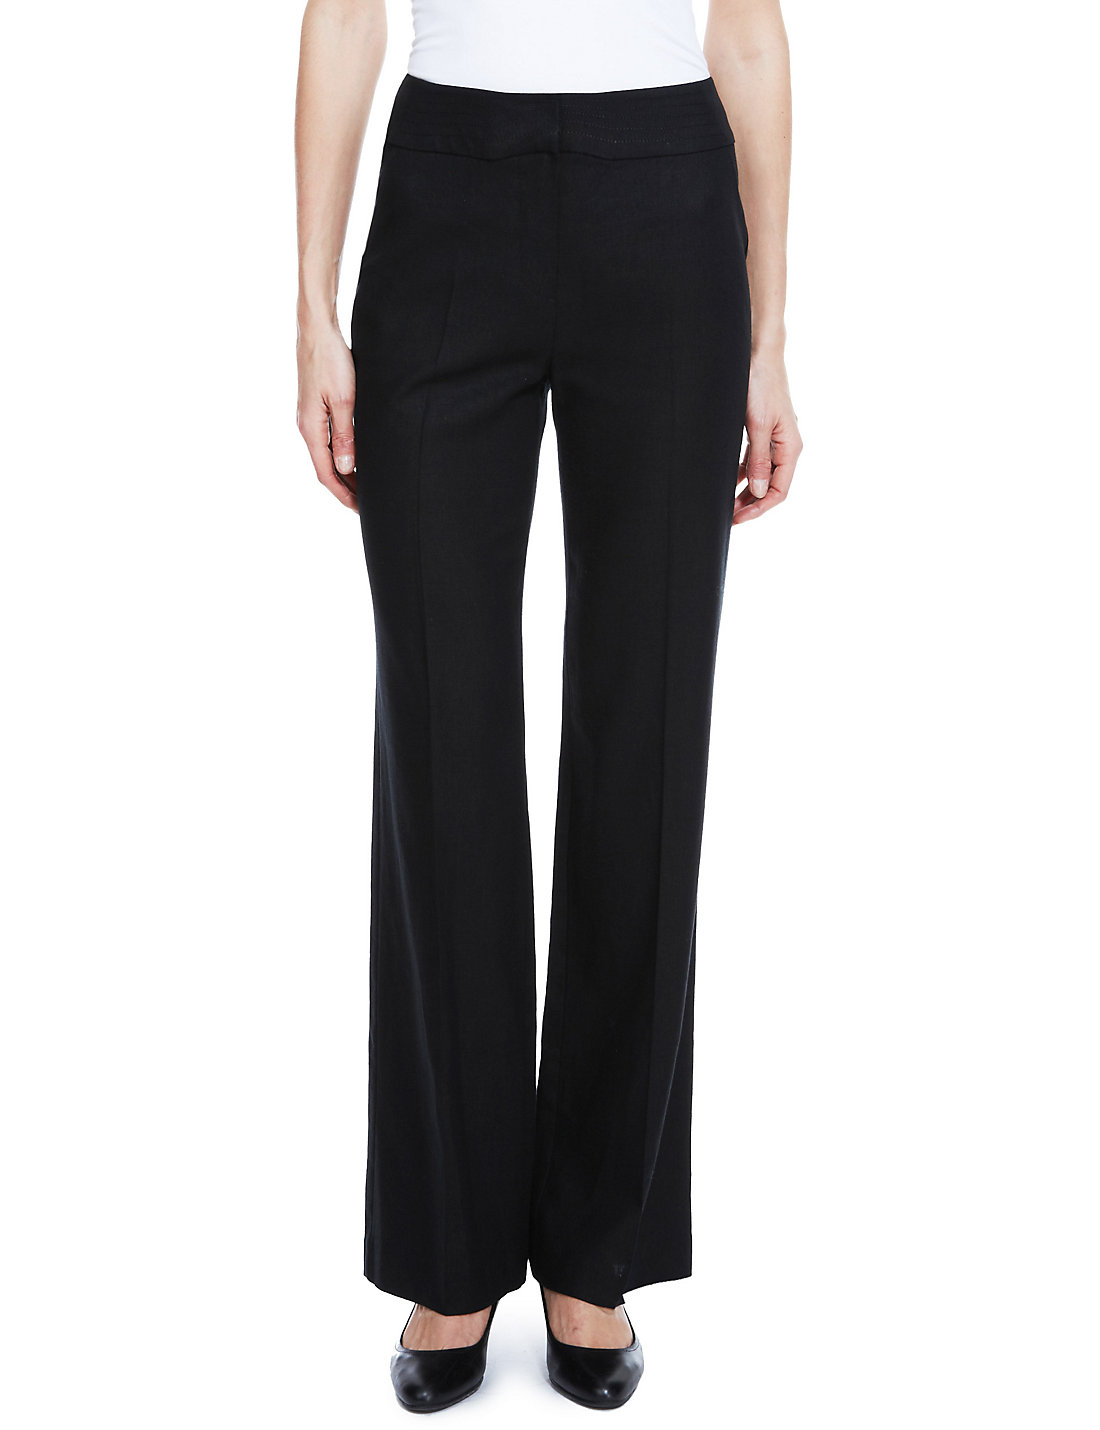 Marks and Spencer - - M&5 BLACK Linen Blend Wide Waistband Trousers ...